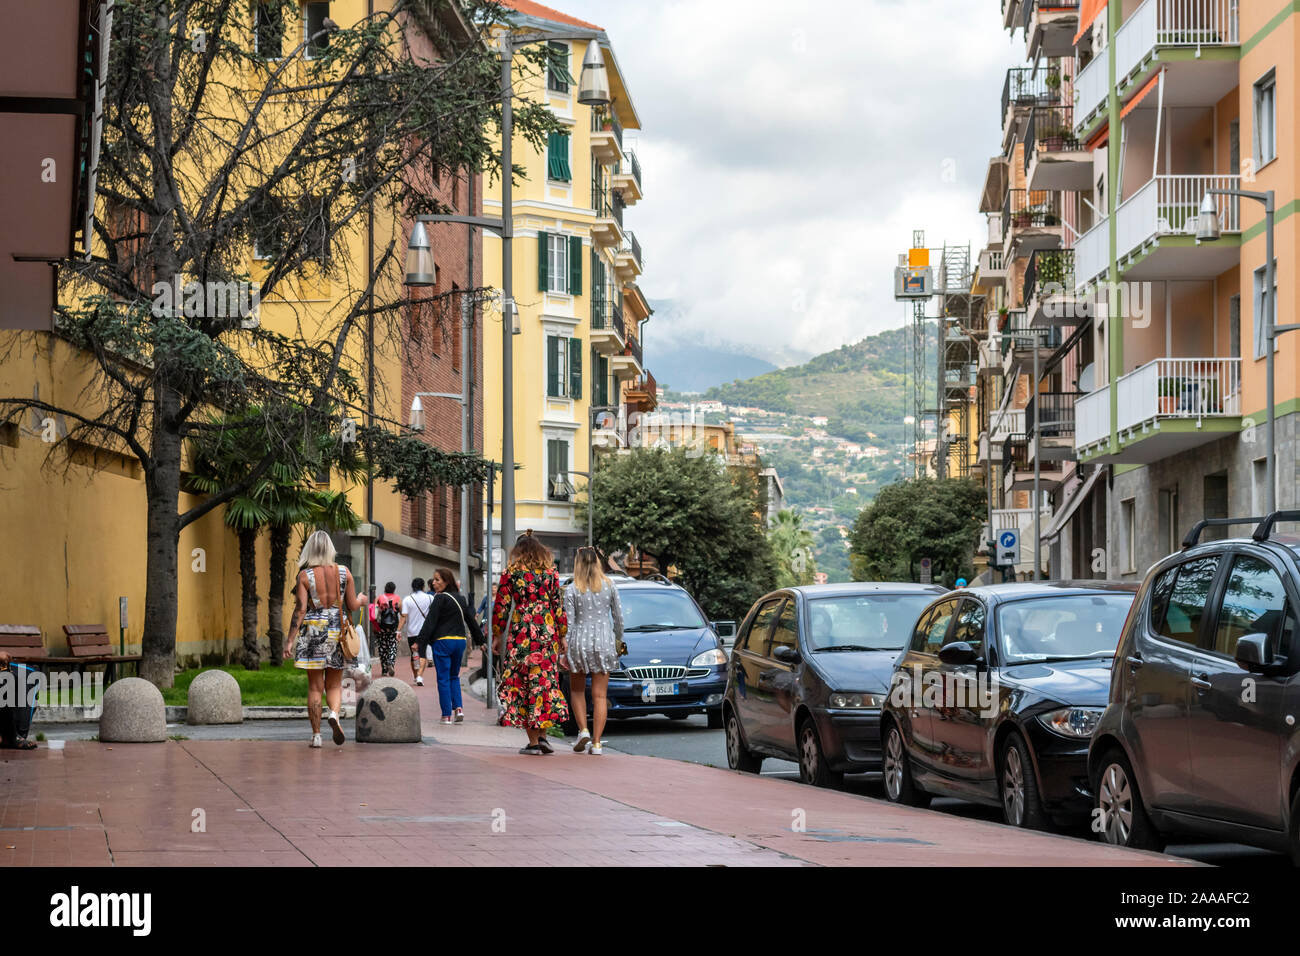 Italian women with colorful print dresses walk along a residential street in the Ligurian city of Ventimiglia, Italy, on the Italian Riviera. Stock Photo